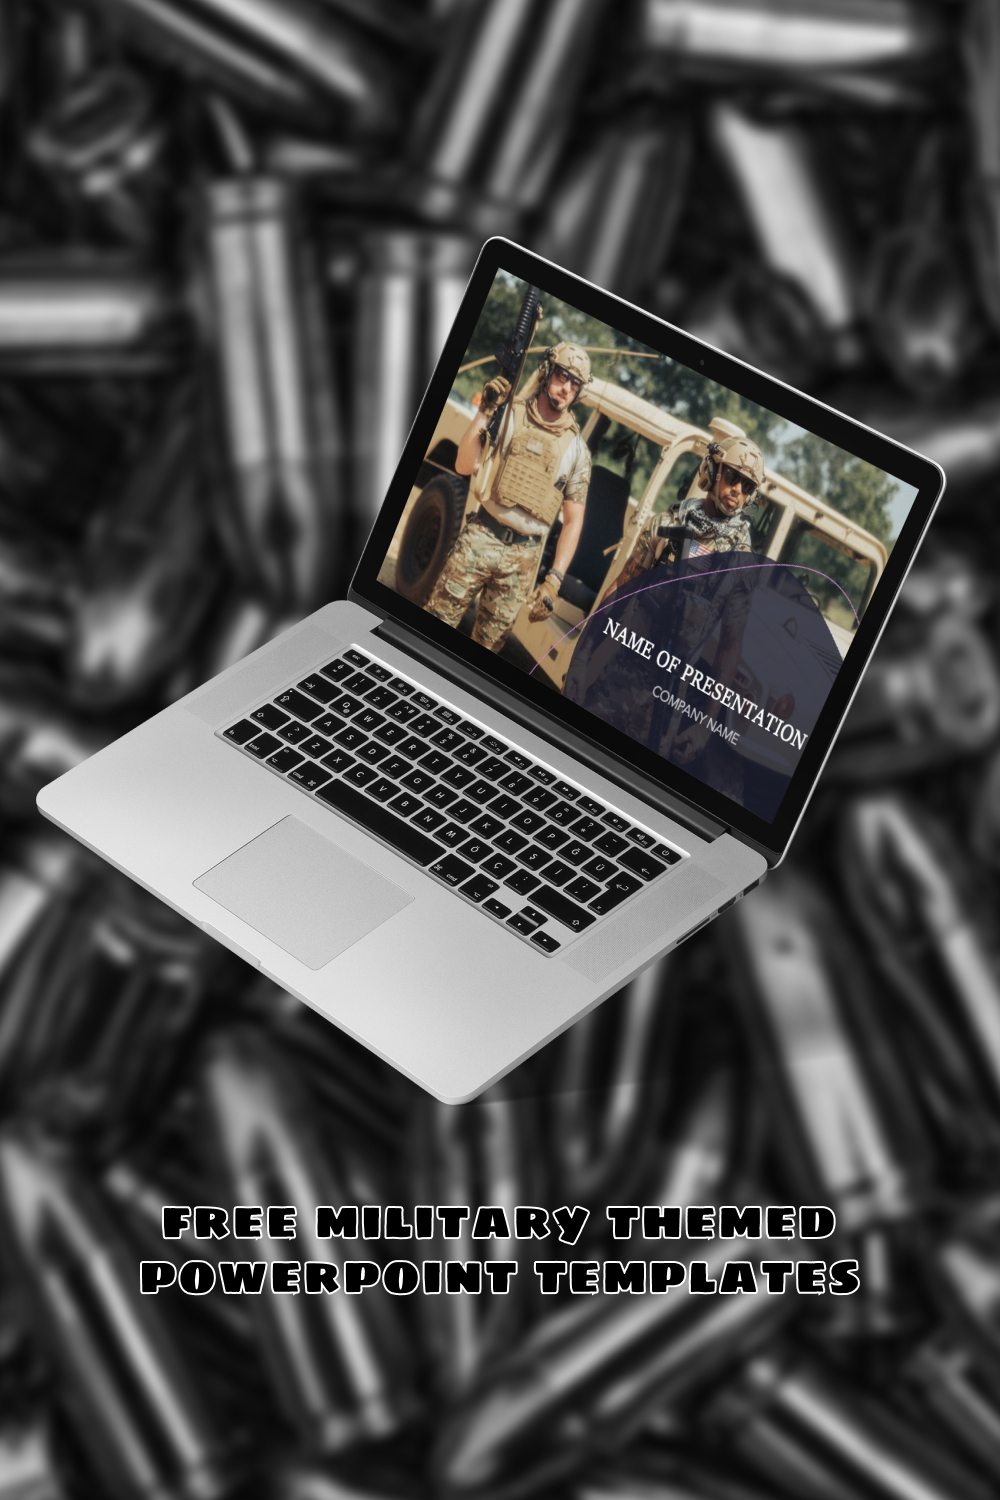 Military themed powerpoint templates on screen of laptop.